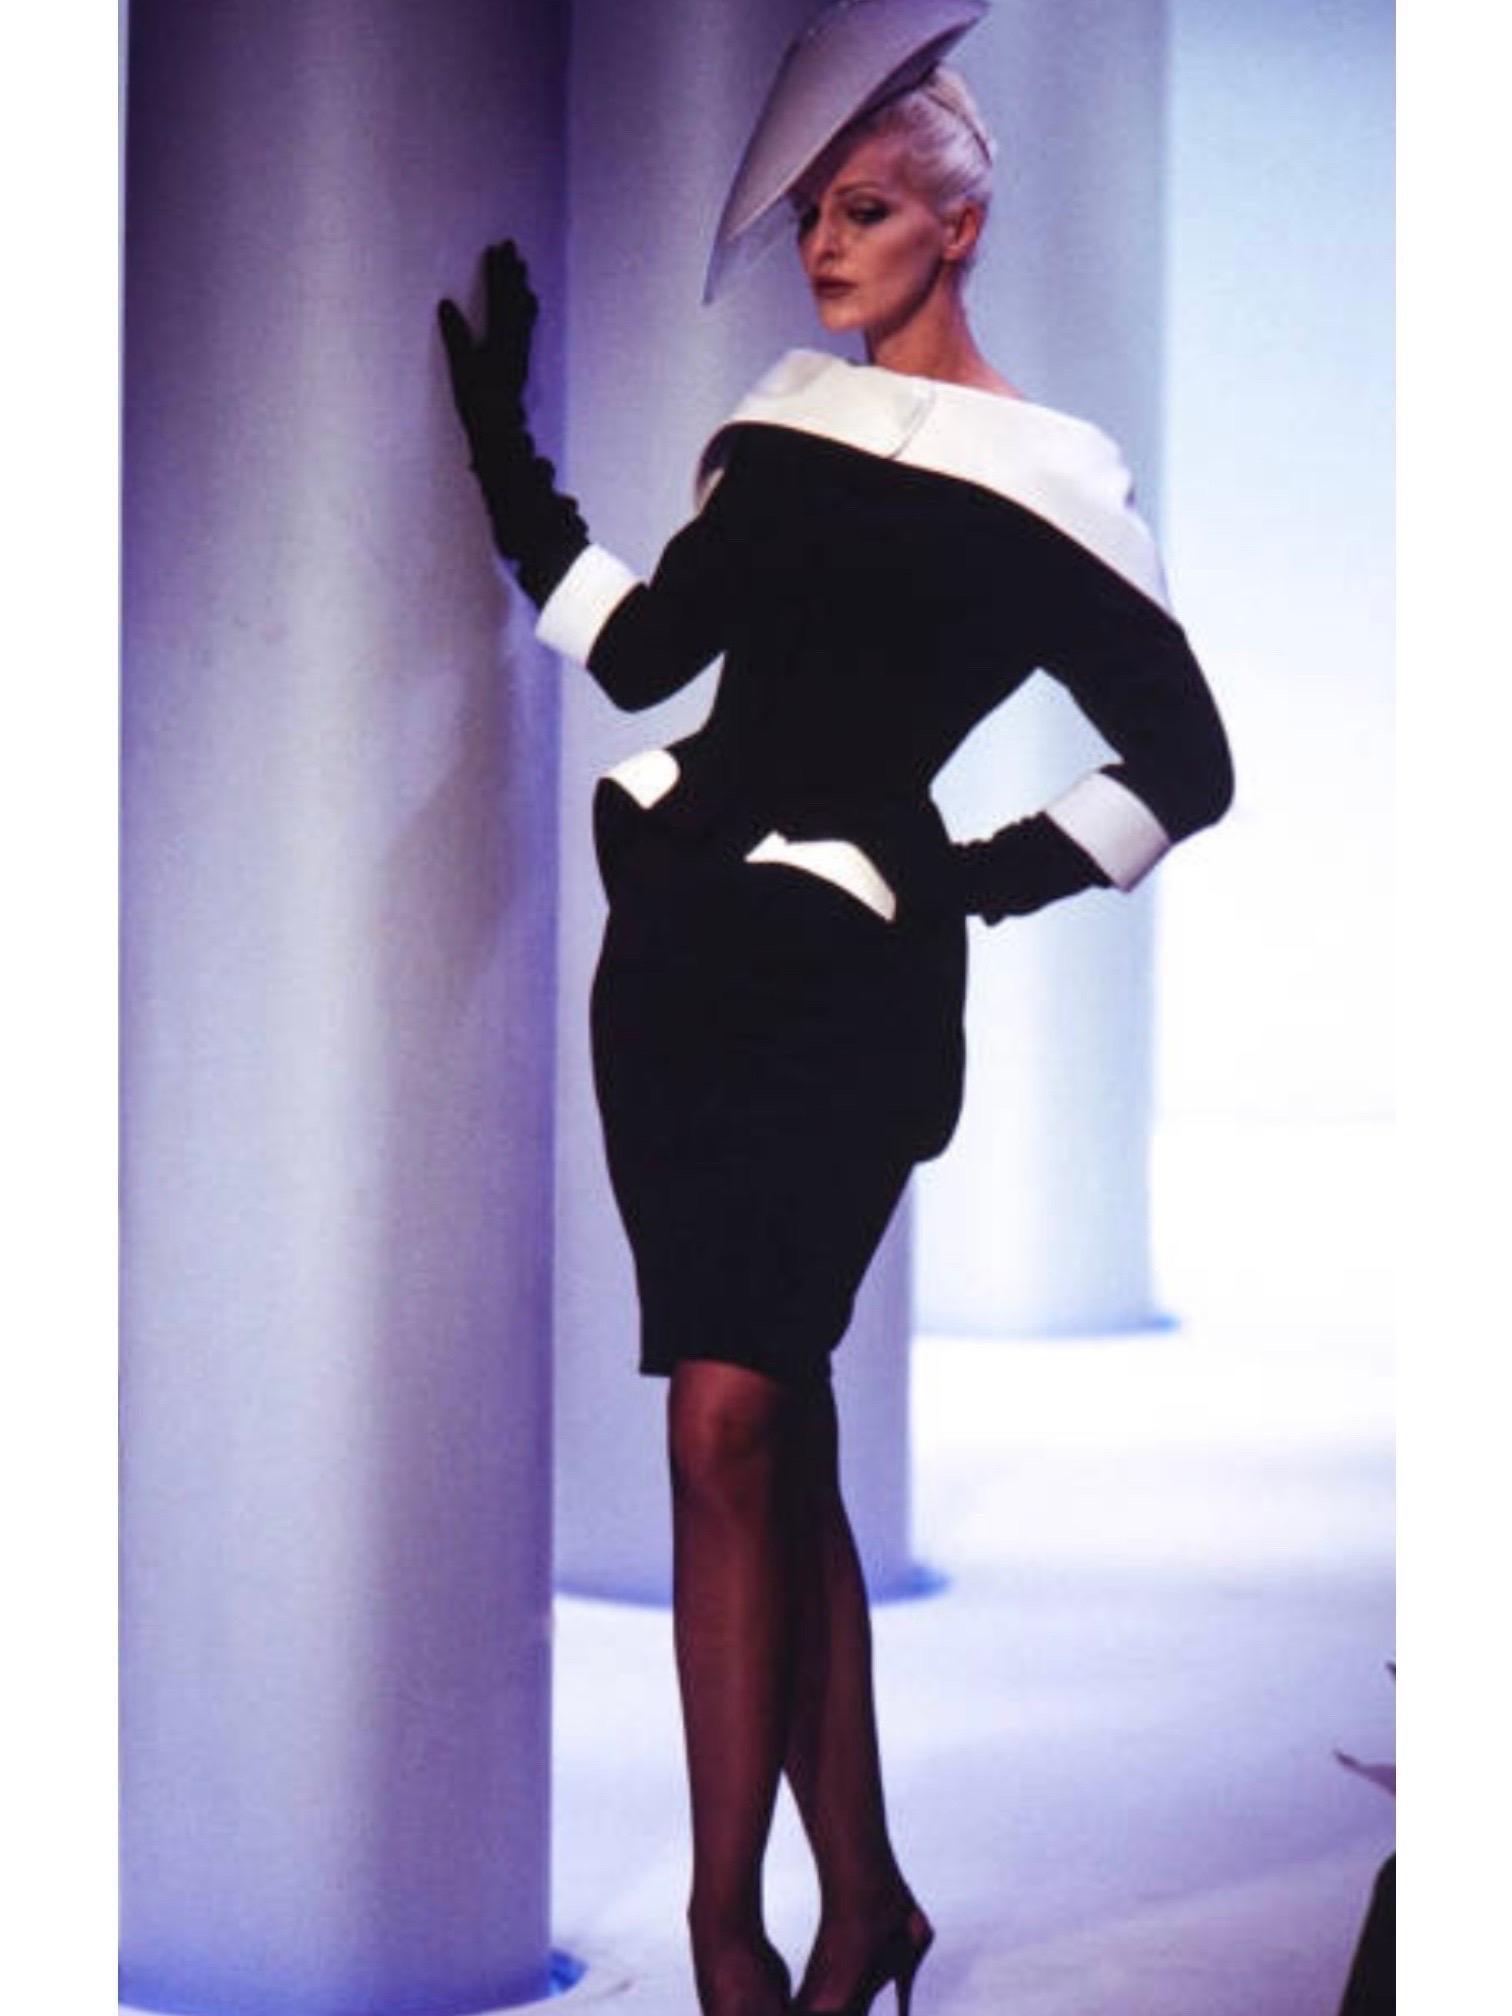 Own a piece of fashion history with this extraordinary documented Thierry Mugler Spring Summer 1996 skirt suit. Black and white jacket with a large folding collar and a large white statement button on the collar. Classic Mugler form with dramatic